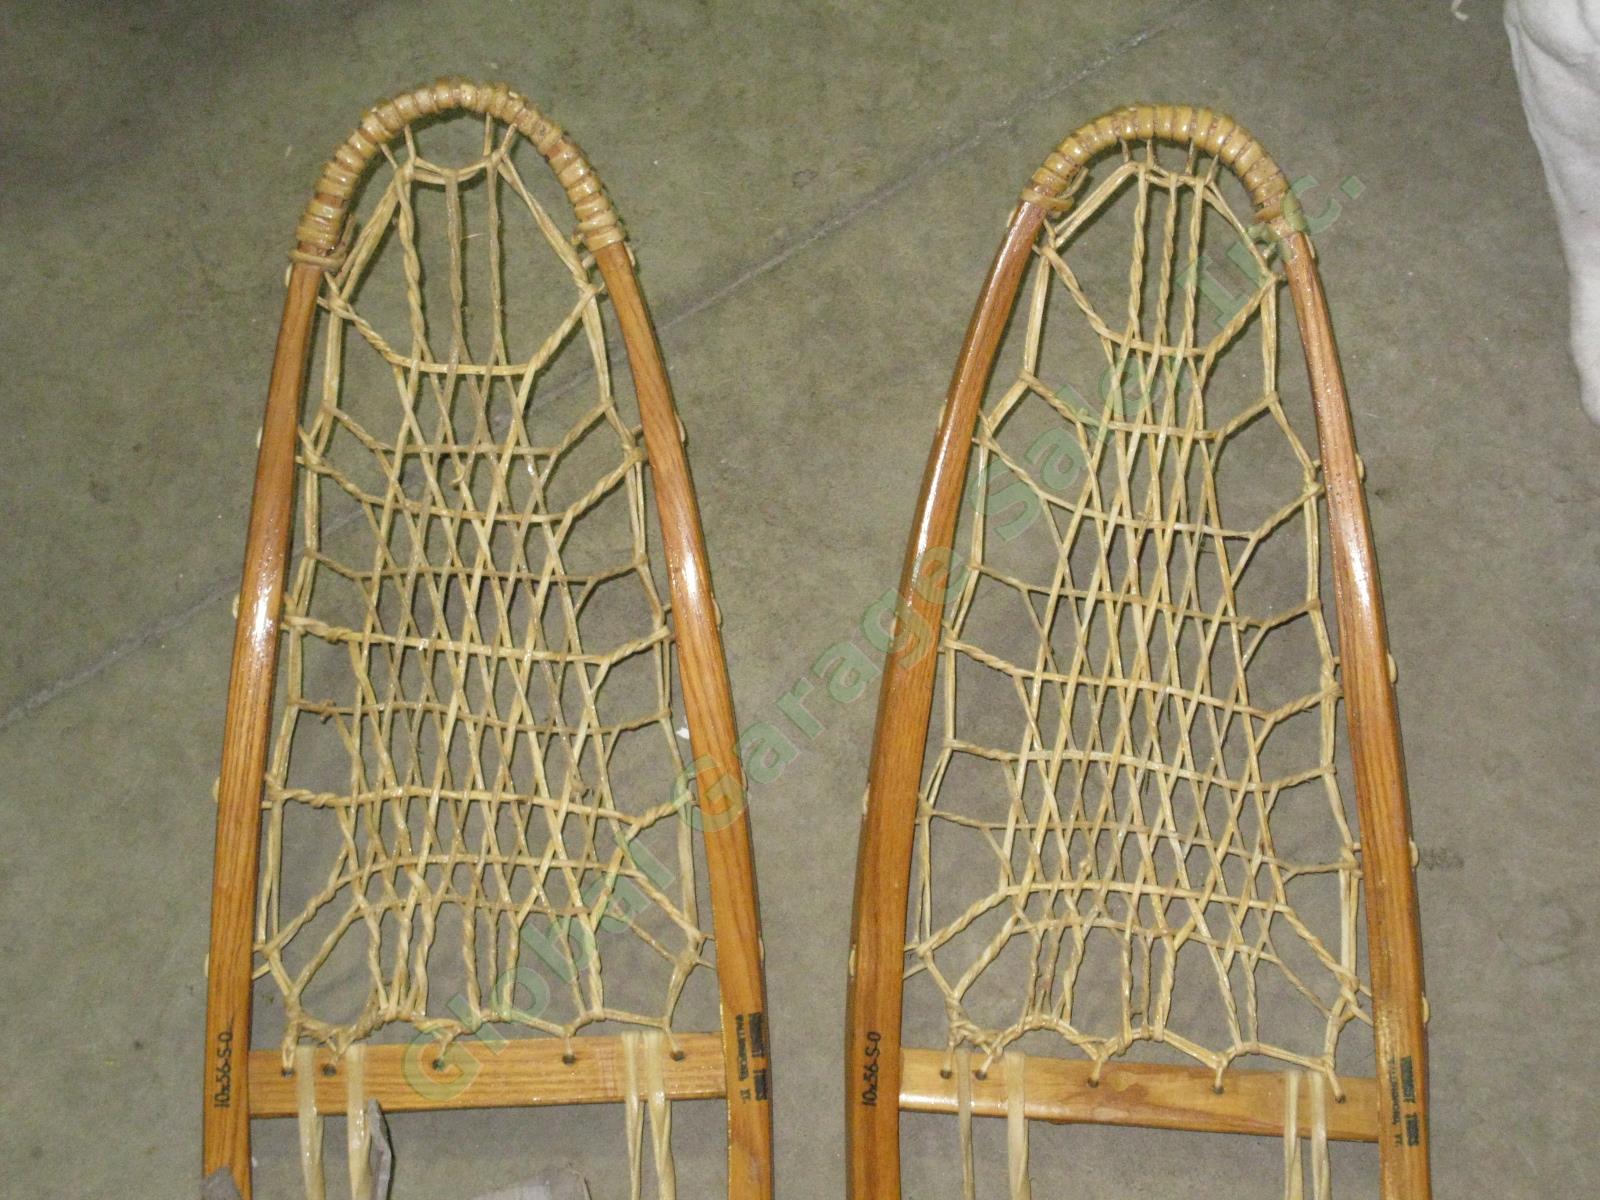 Vtg Wood Wooden Vermont Made Tubbs Snowshoes 10x56-S-0 w/Bindings Exc Cond NR! 1